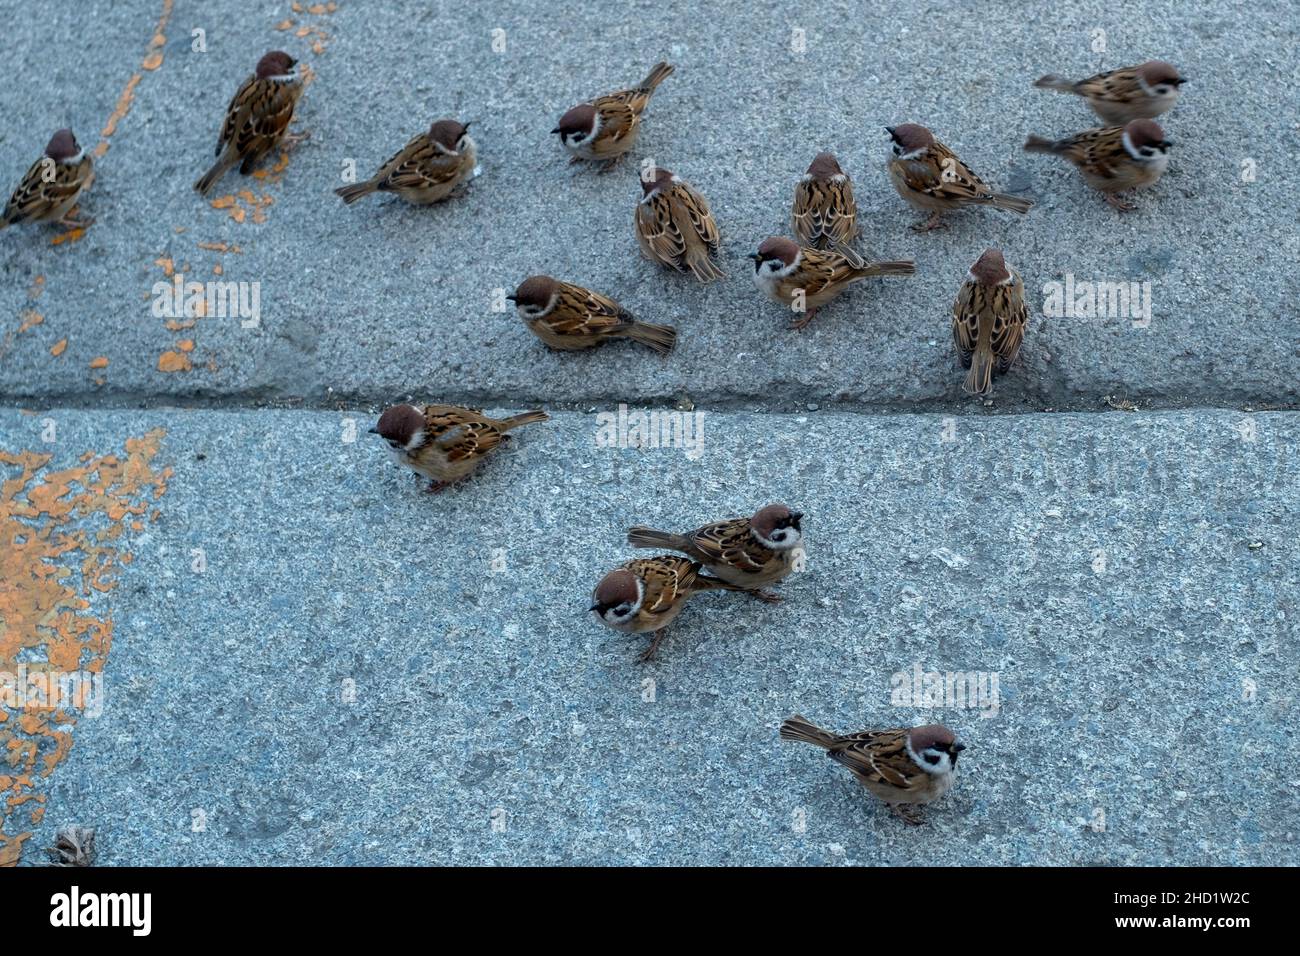 A flock of sparrows landing to eat millet. Stock Photo